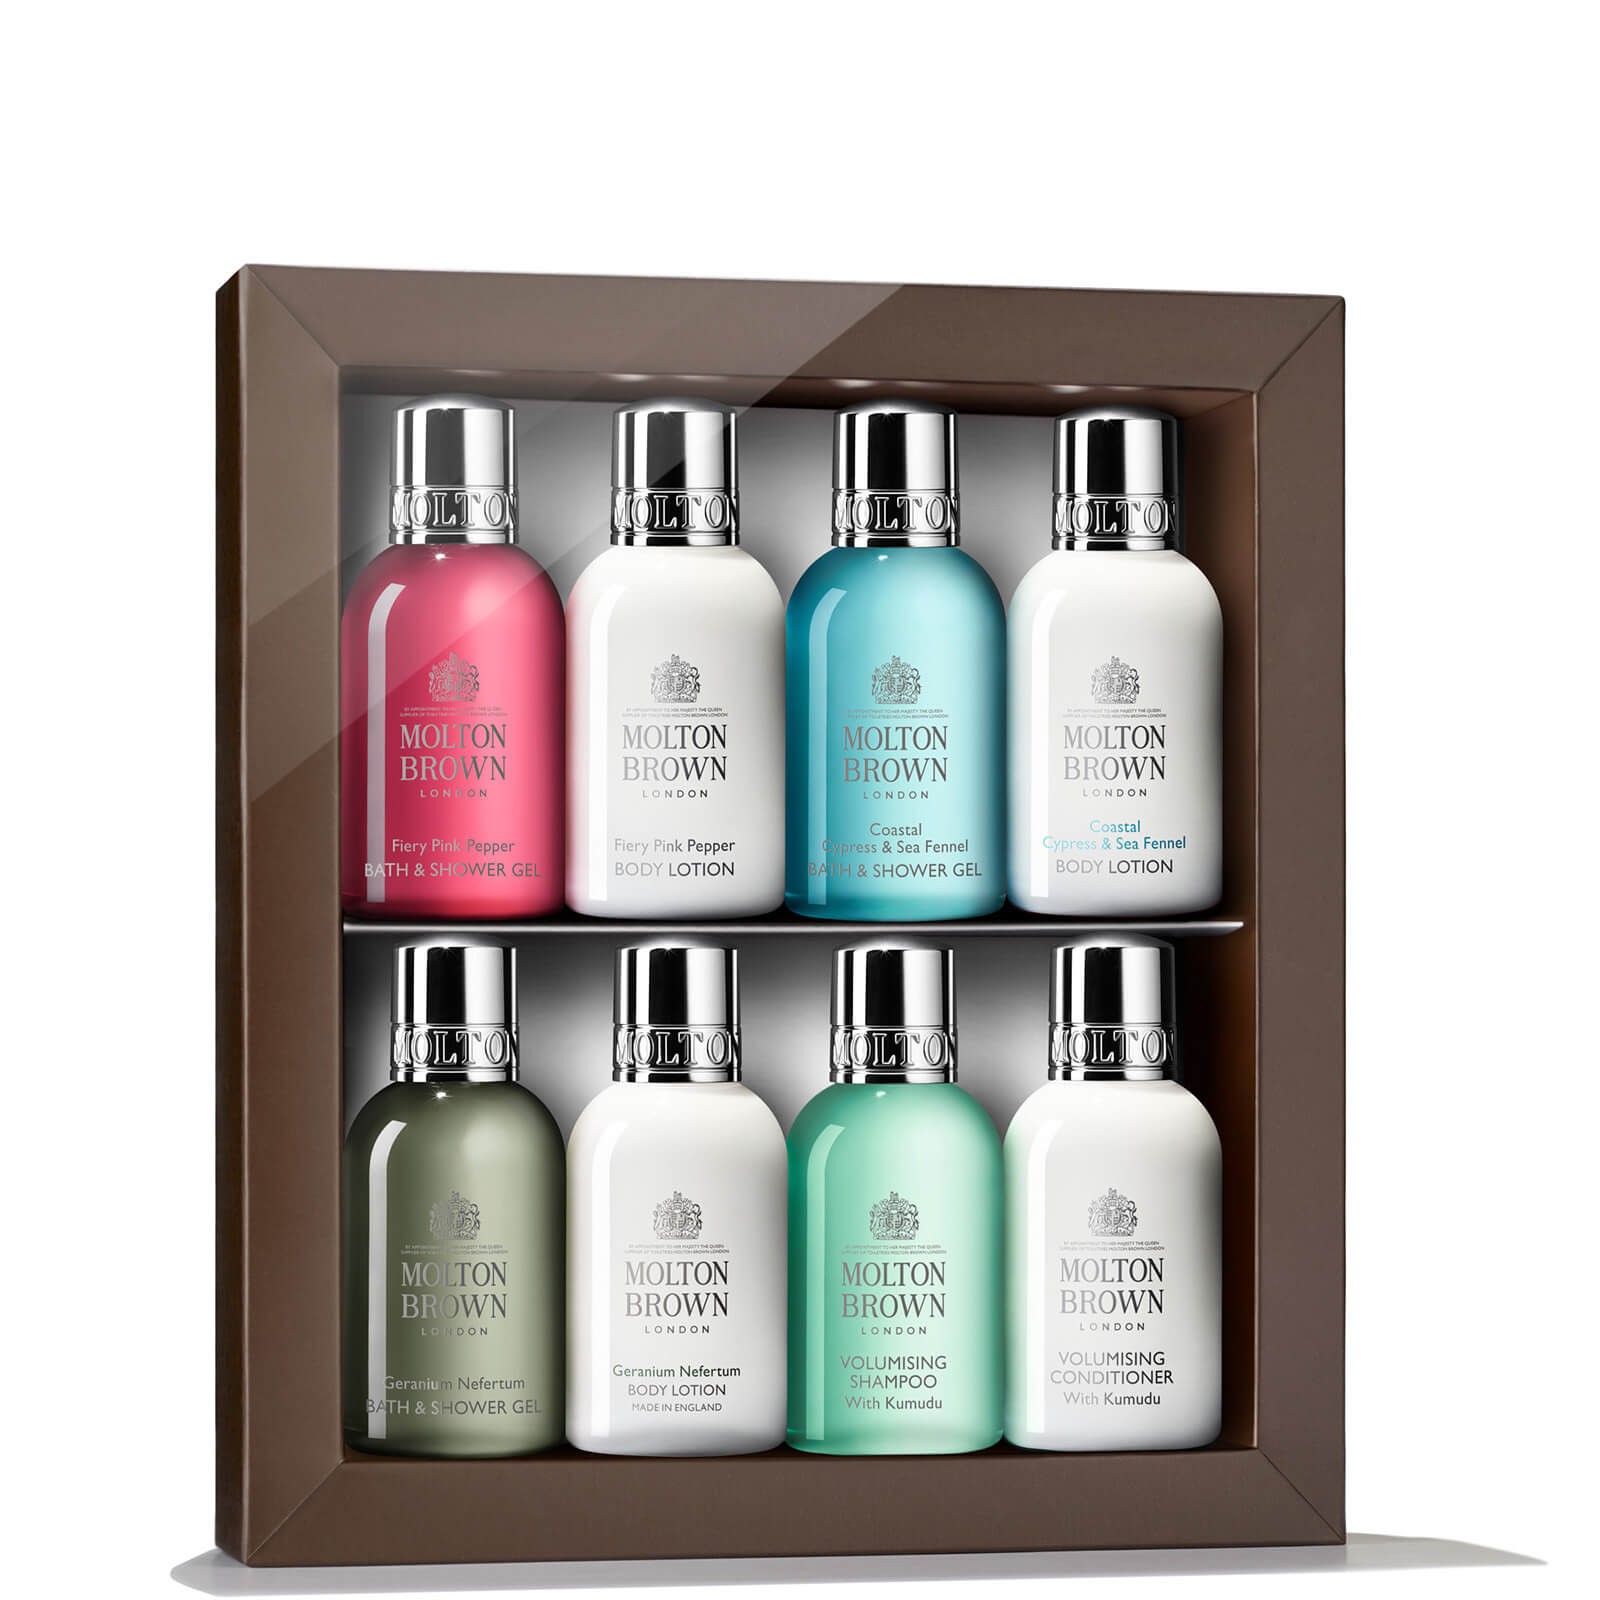 Molton Brown Discovery Body & Hair Collection (Worth £29.33)